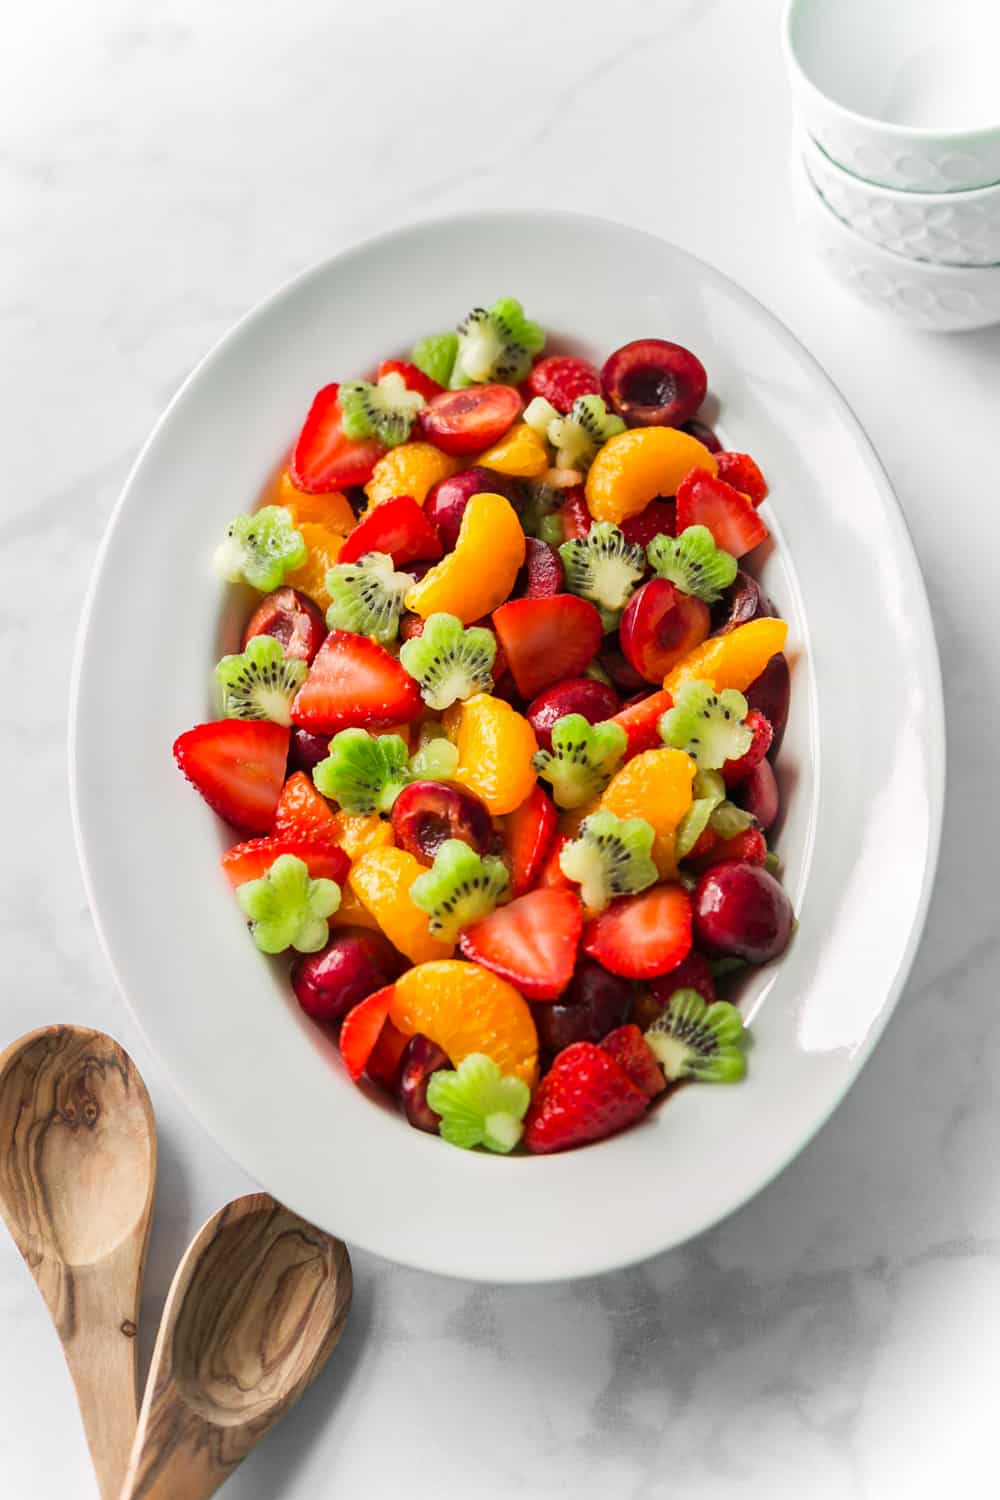 White serving platter with a colorful fruit salad including strawberries, kiwi cut into flower shapes, and mandarin oranges.